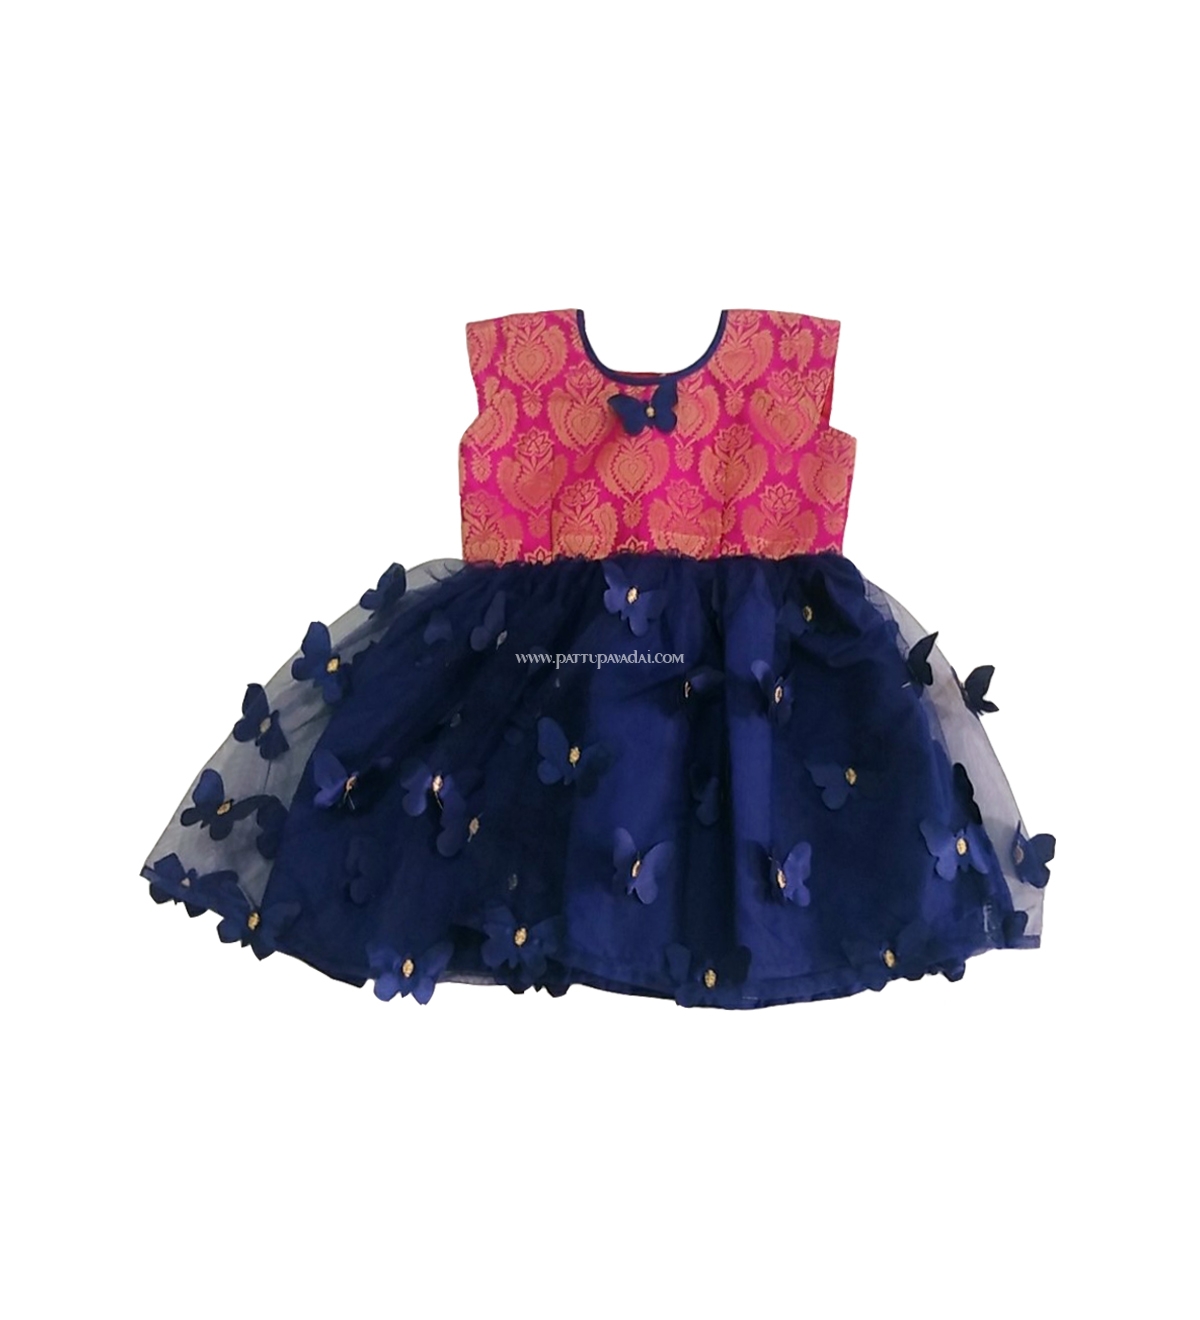 Pink and Navy Blue Netted Frock